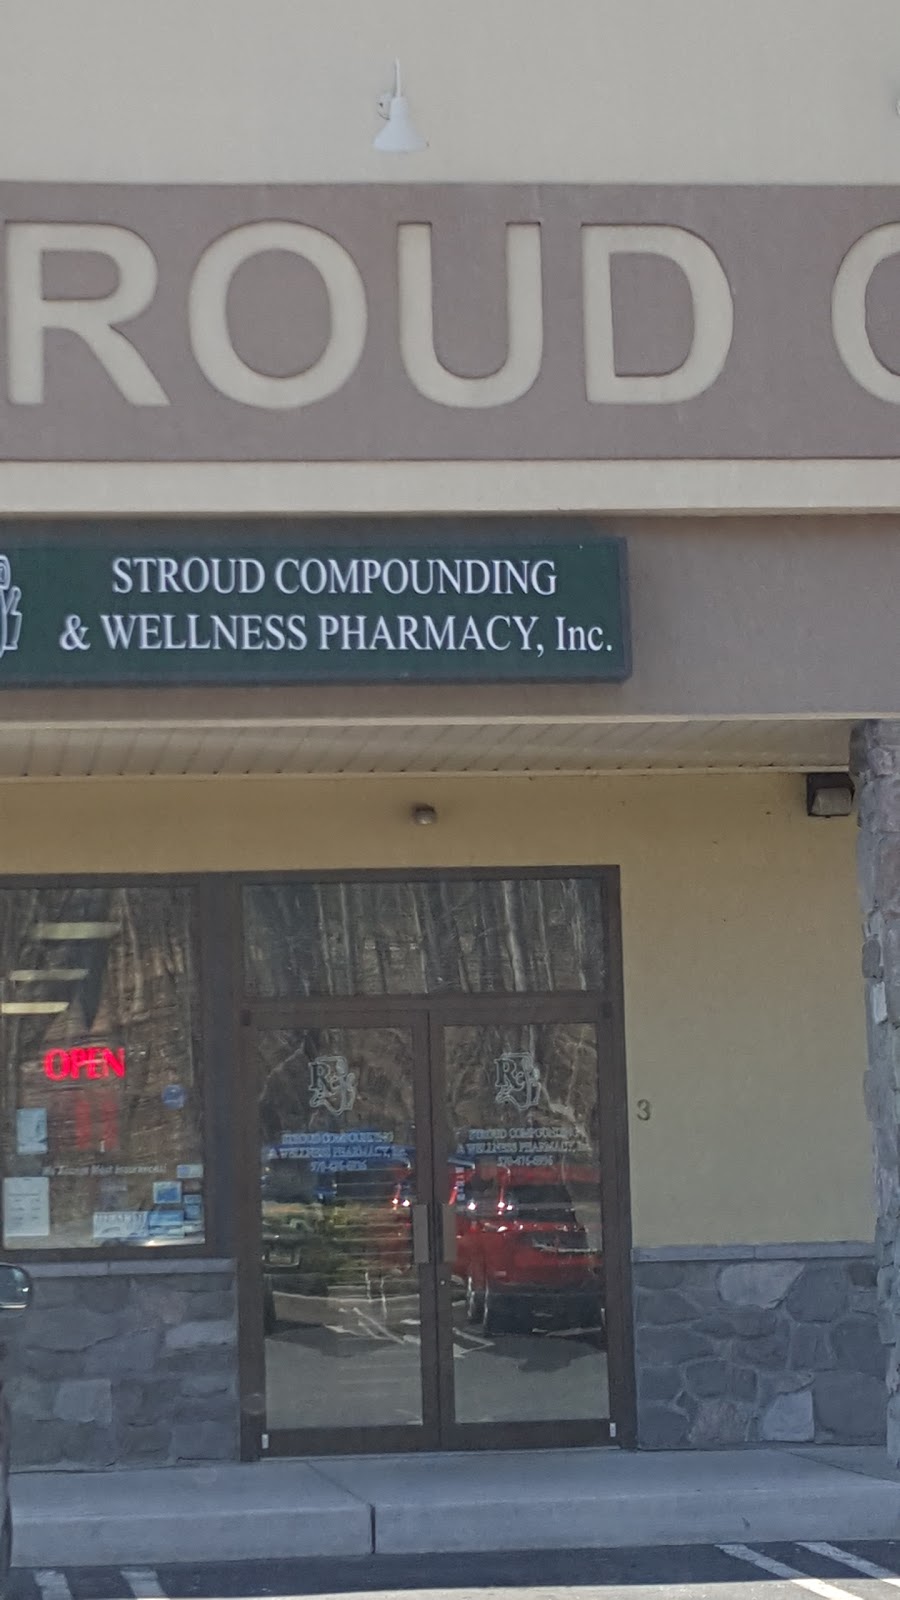 Stroud Compounding & Wellness Drugstore | 1619 N 9th St Suite 3, Stroudsburg, PA 18360 | Phone: (570) 476-6936